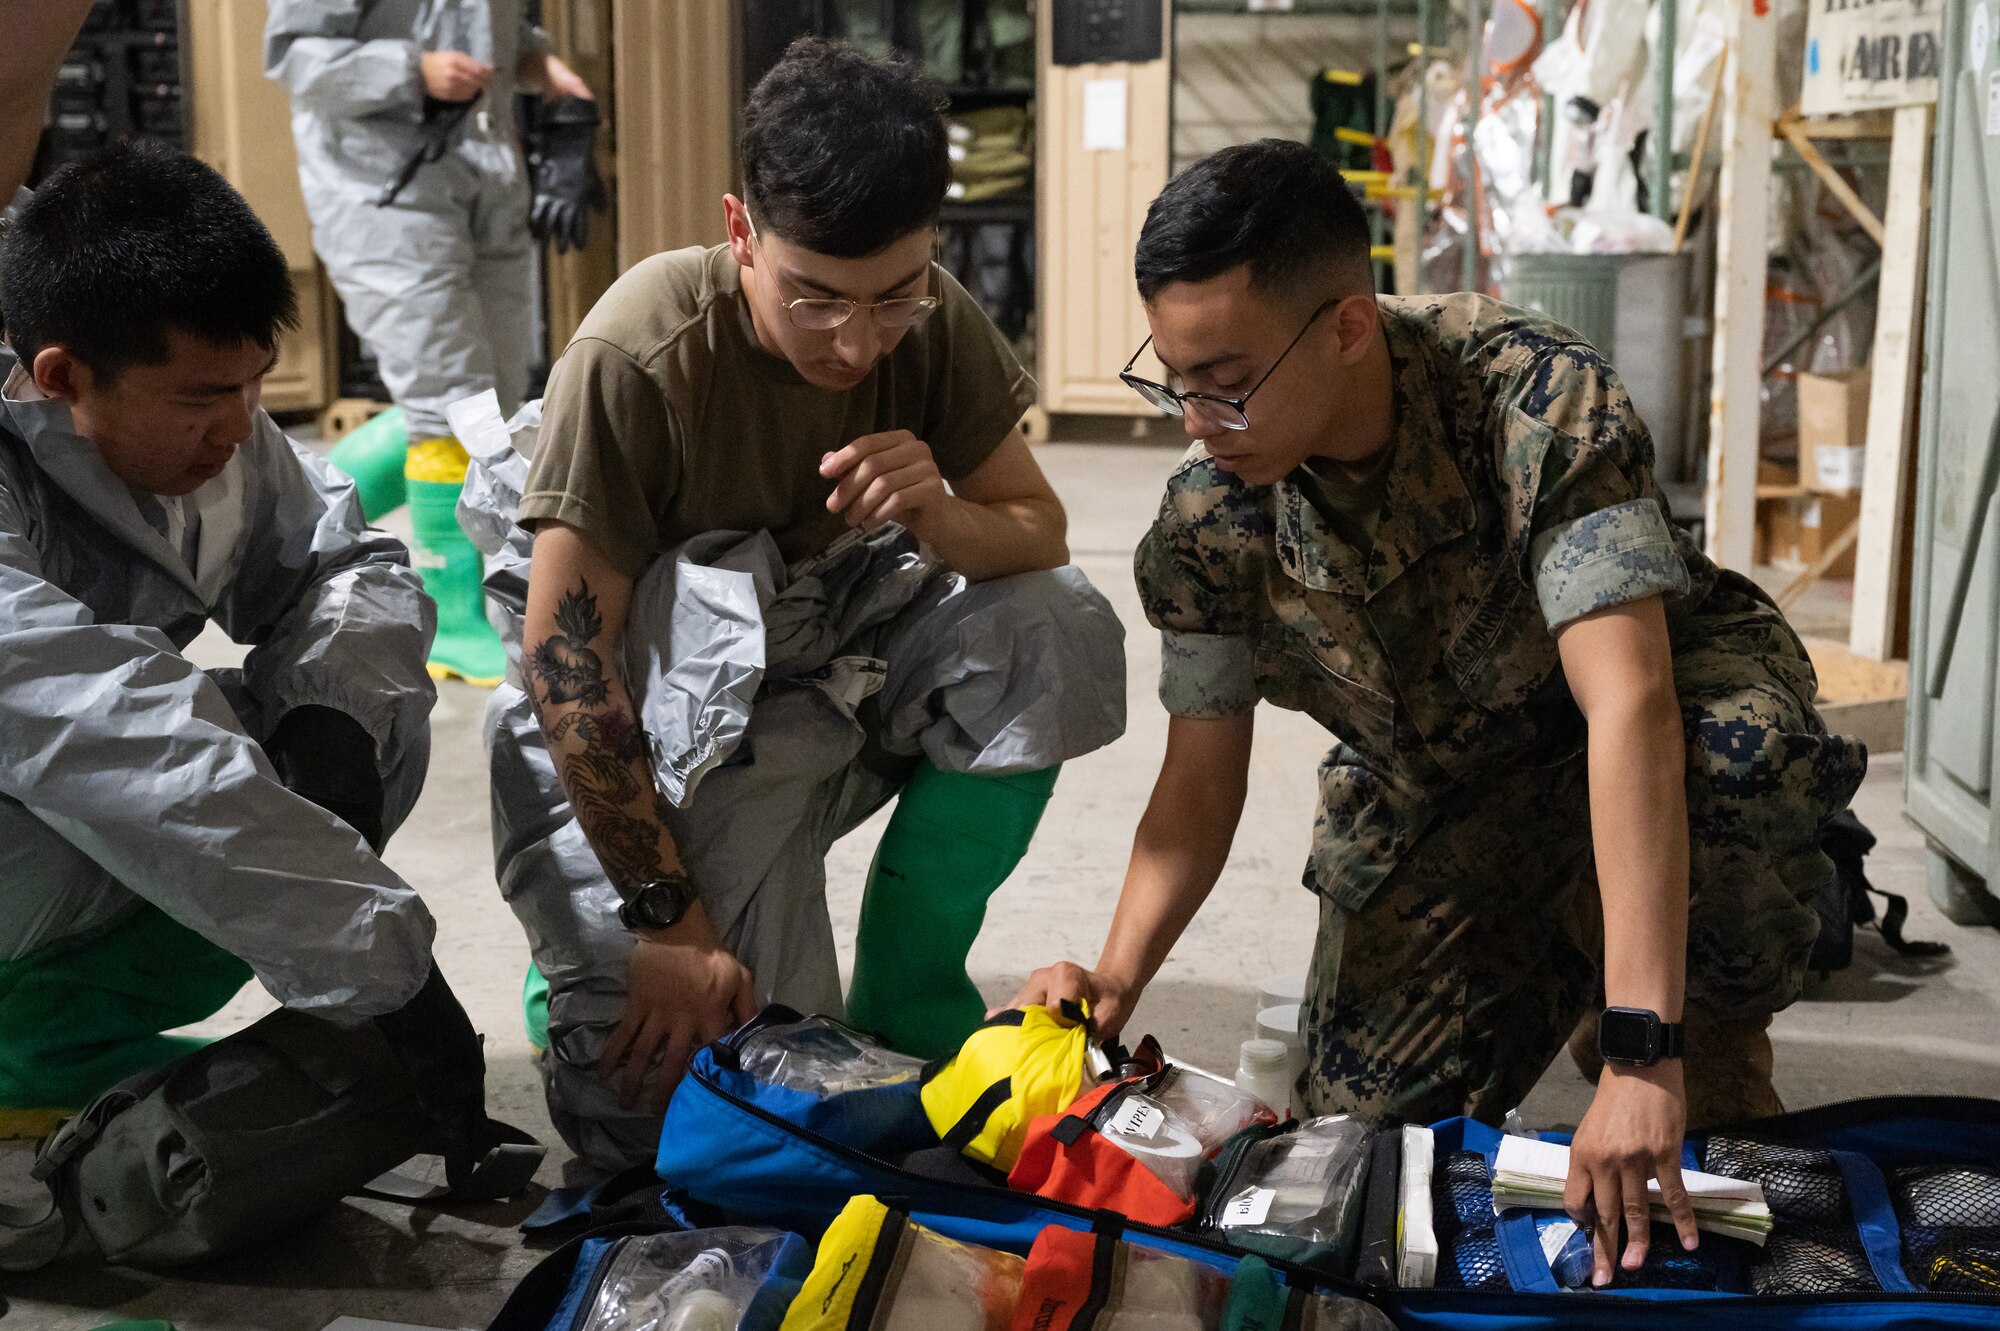 A Marine and Soldiers check CBRN equipment.